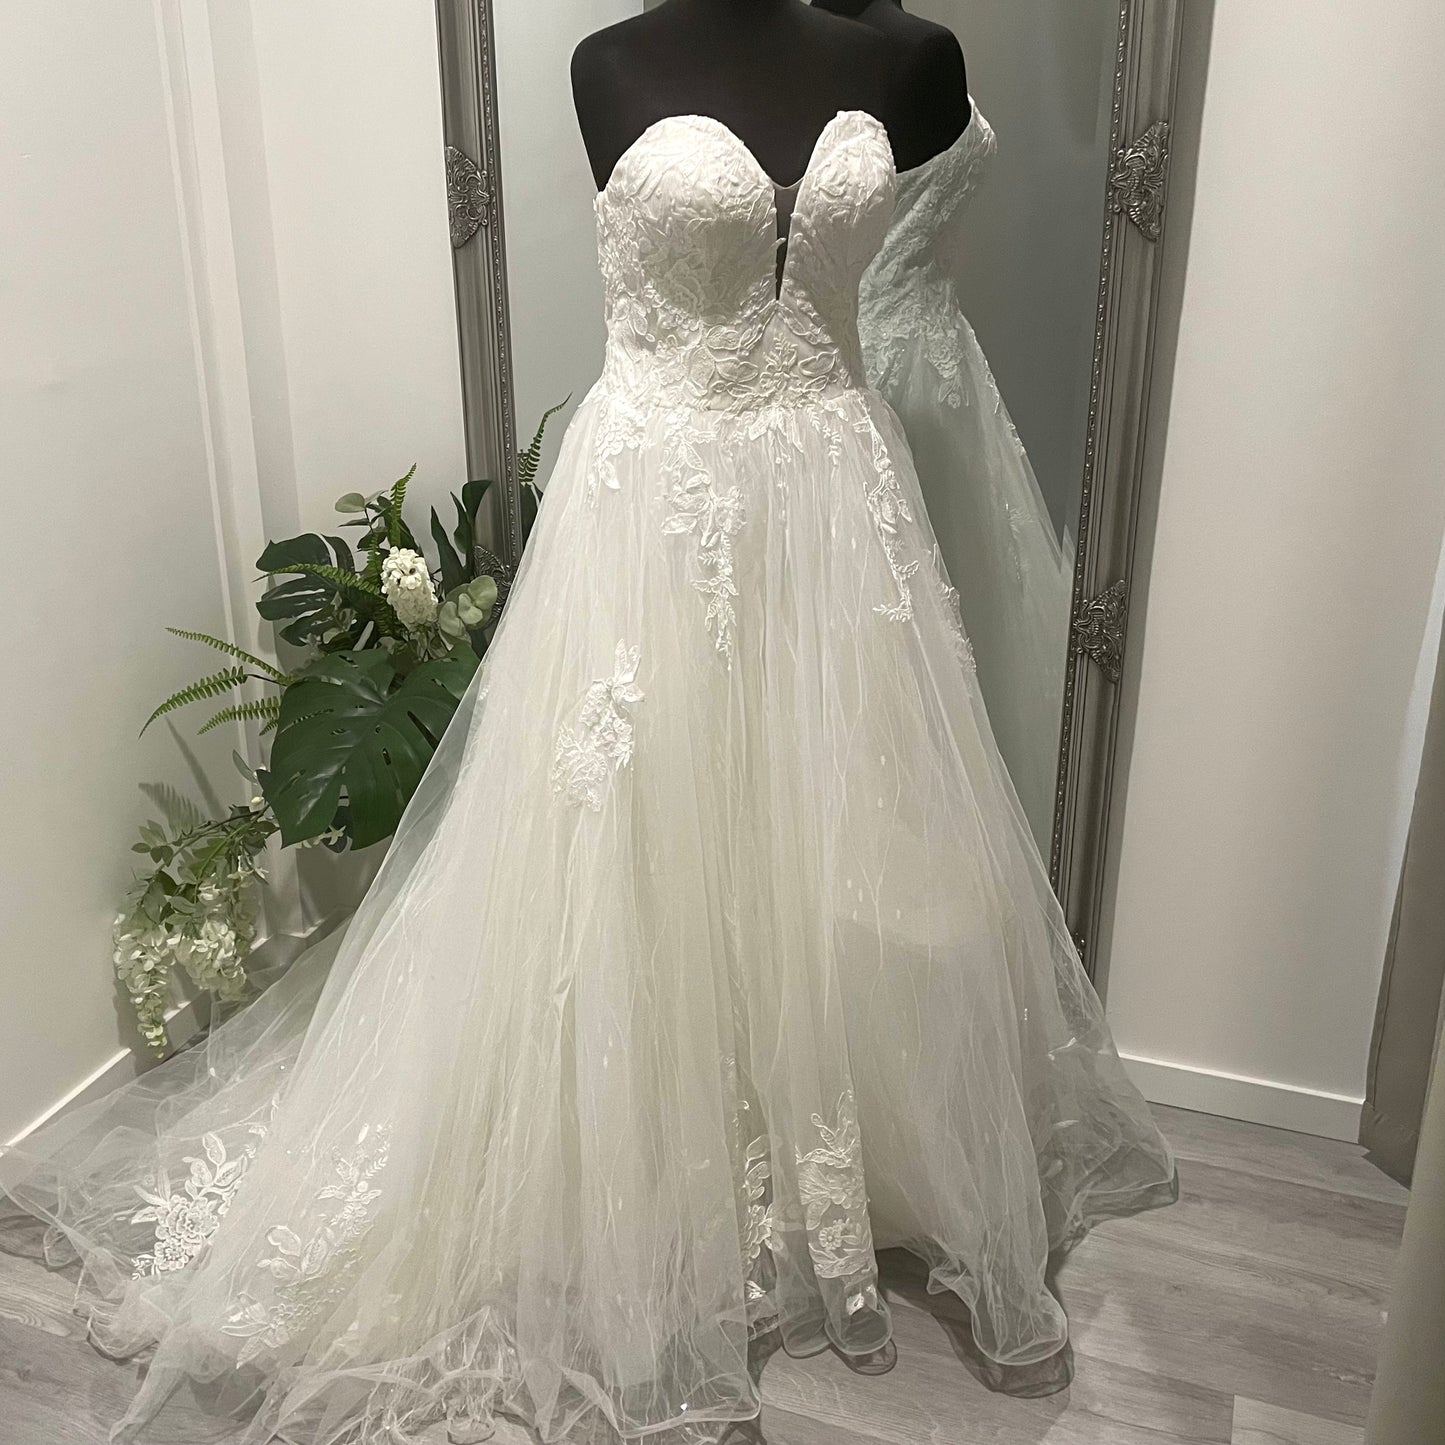 Kate wedding gown